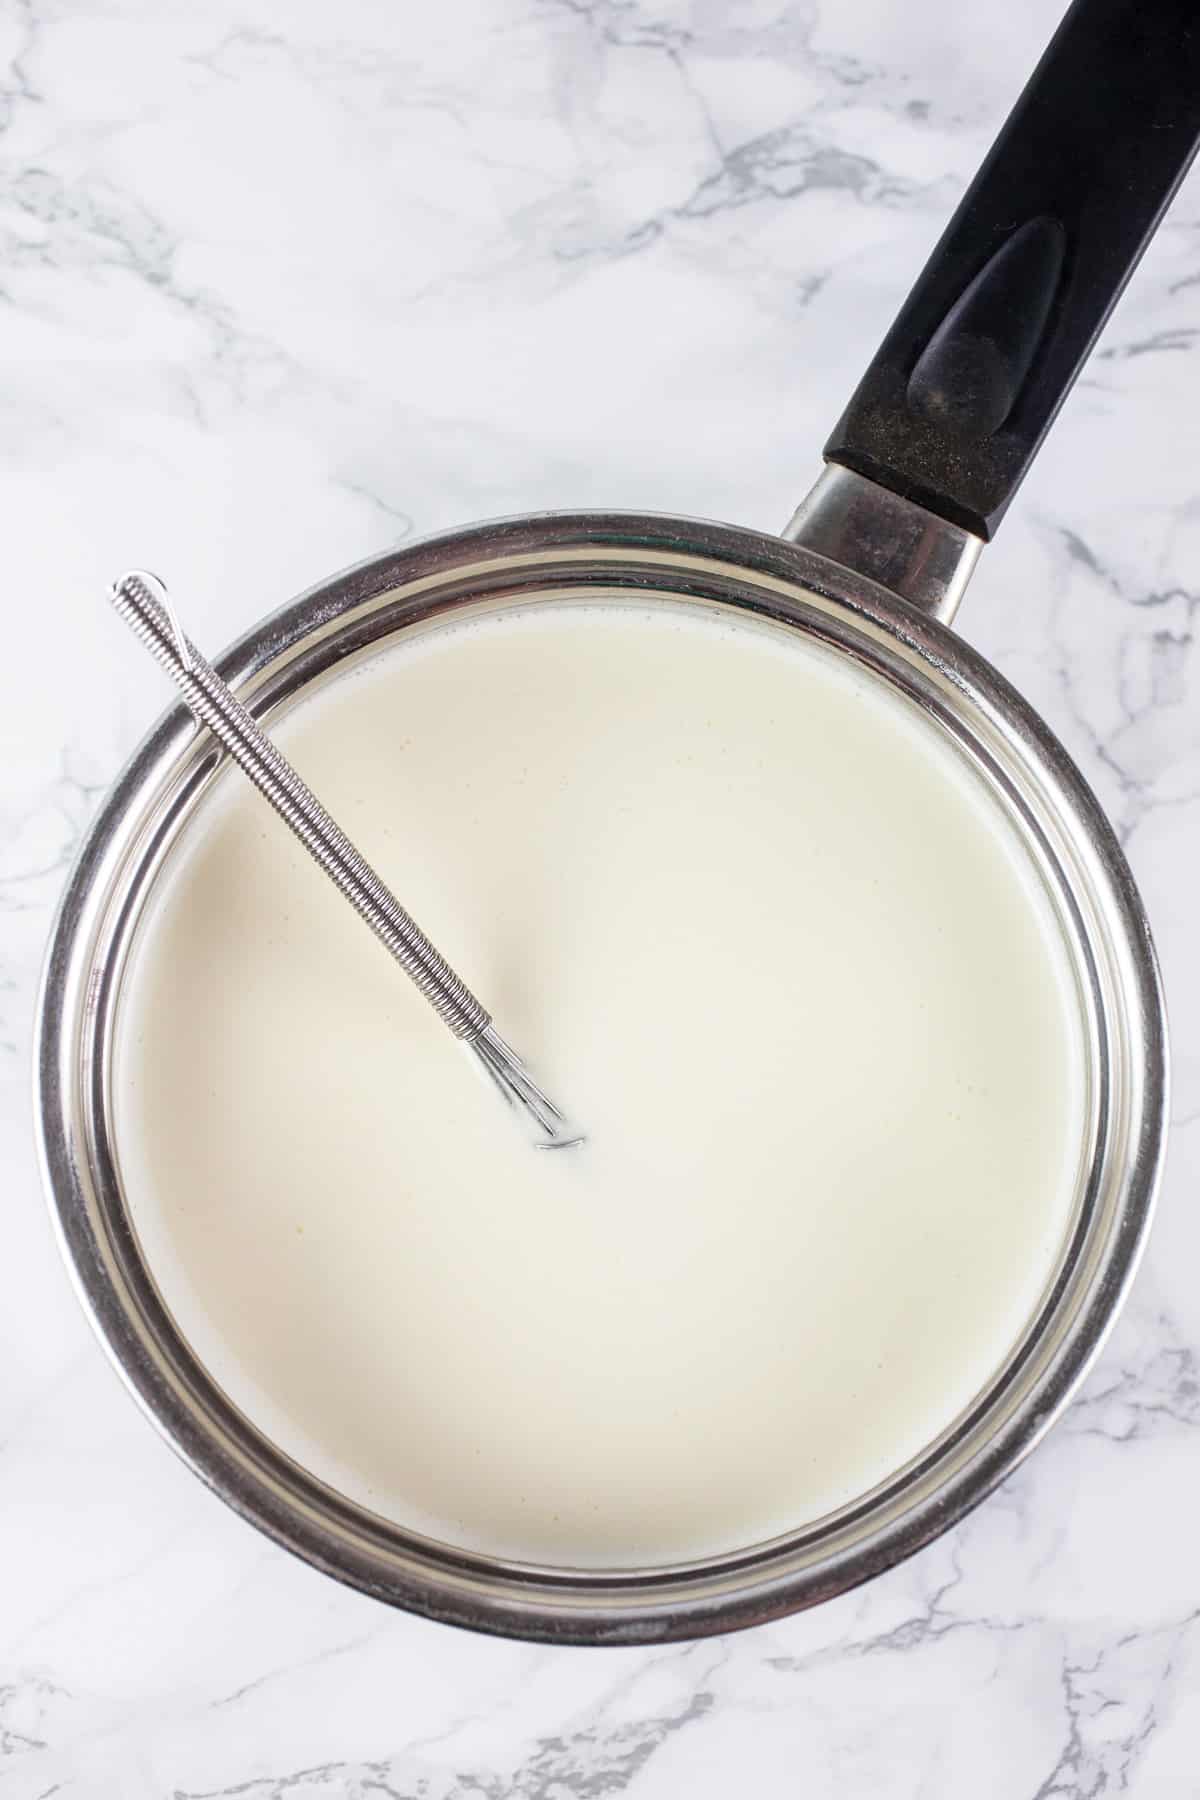 Heavy whipping cream and gelatin mixture in small sauce pan with small whisk.